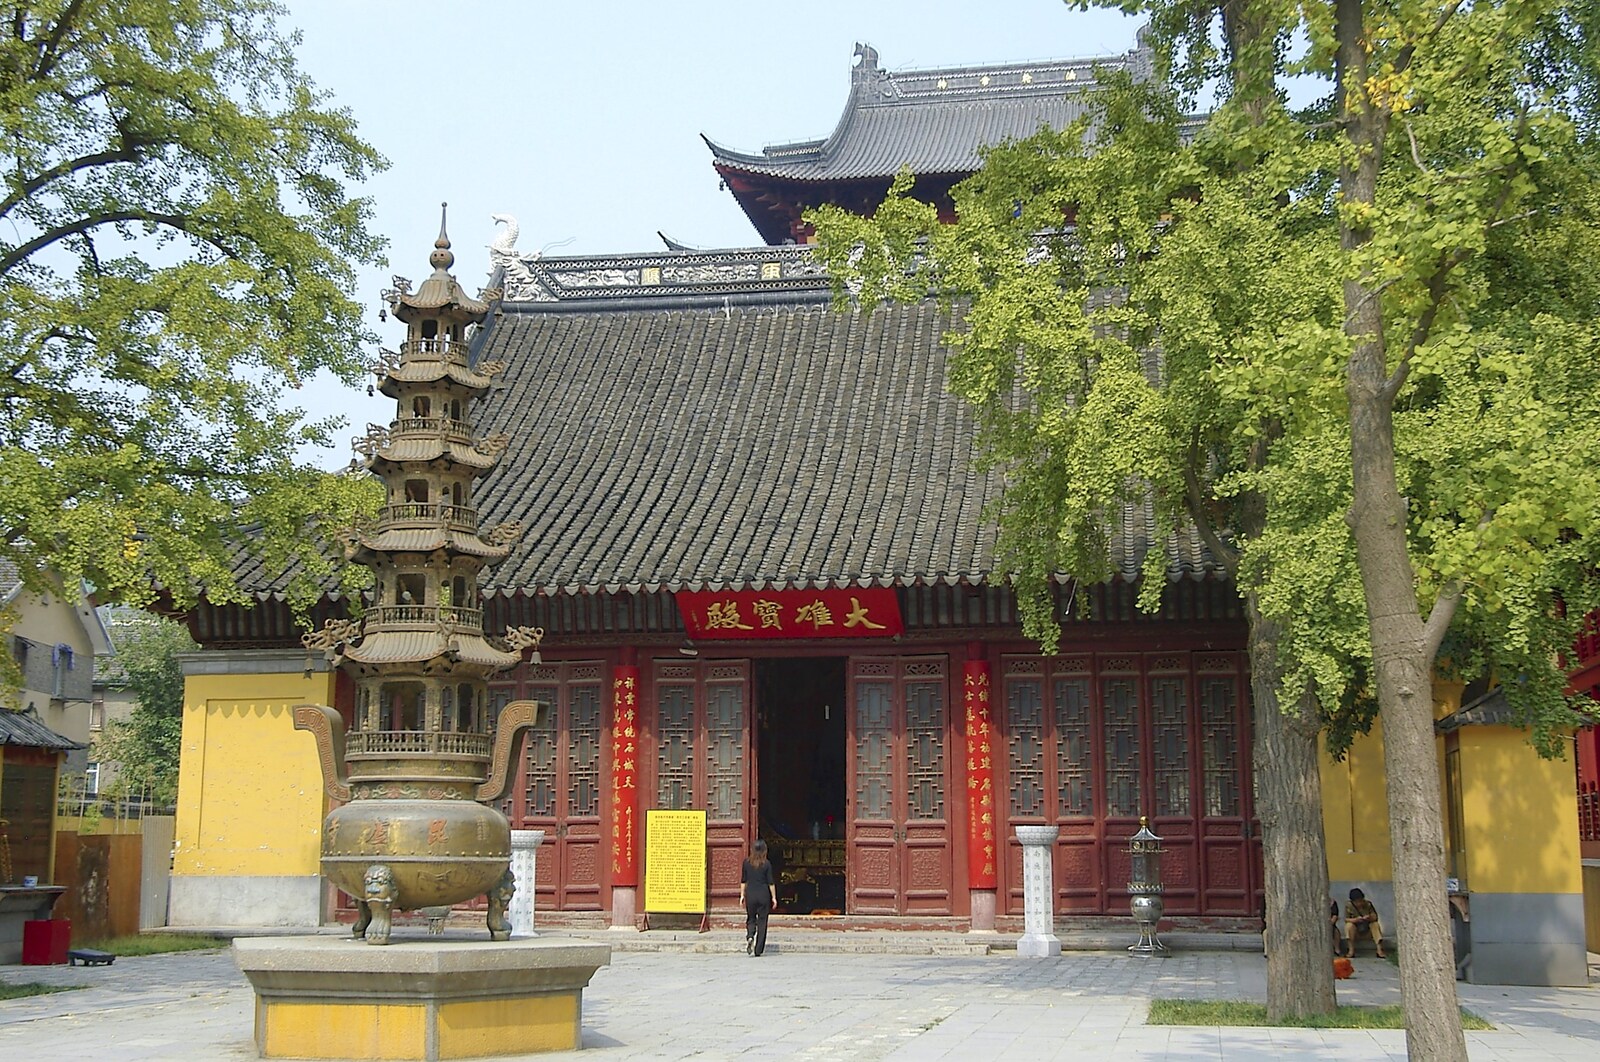 The entrance to the Buddhist temple from A Few Days in Nanjing, Jiangsu Province, China - 7th October 2006